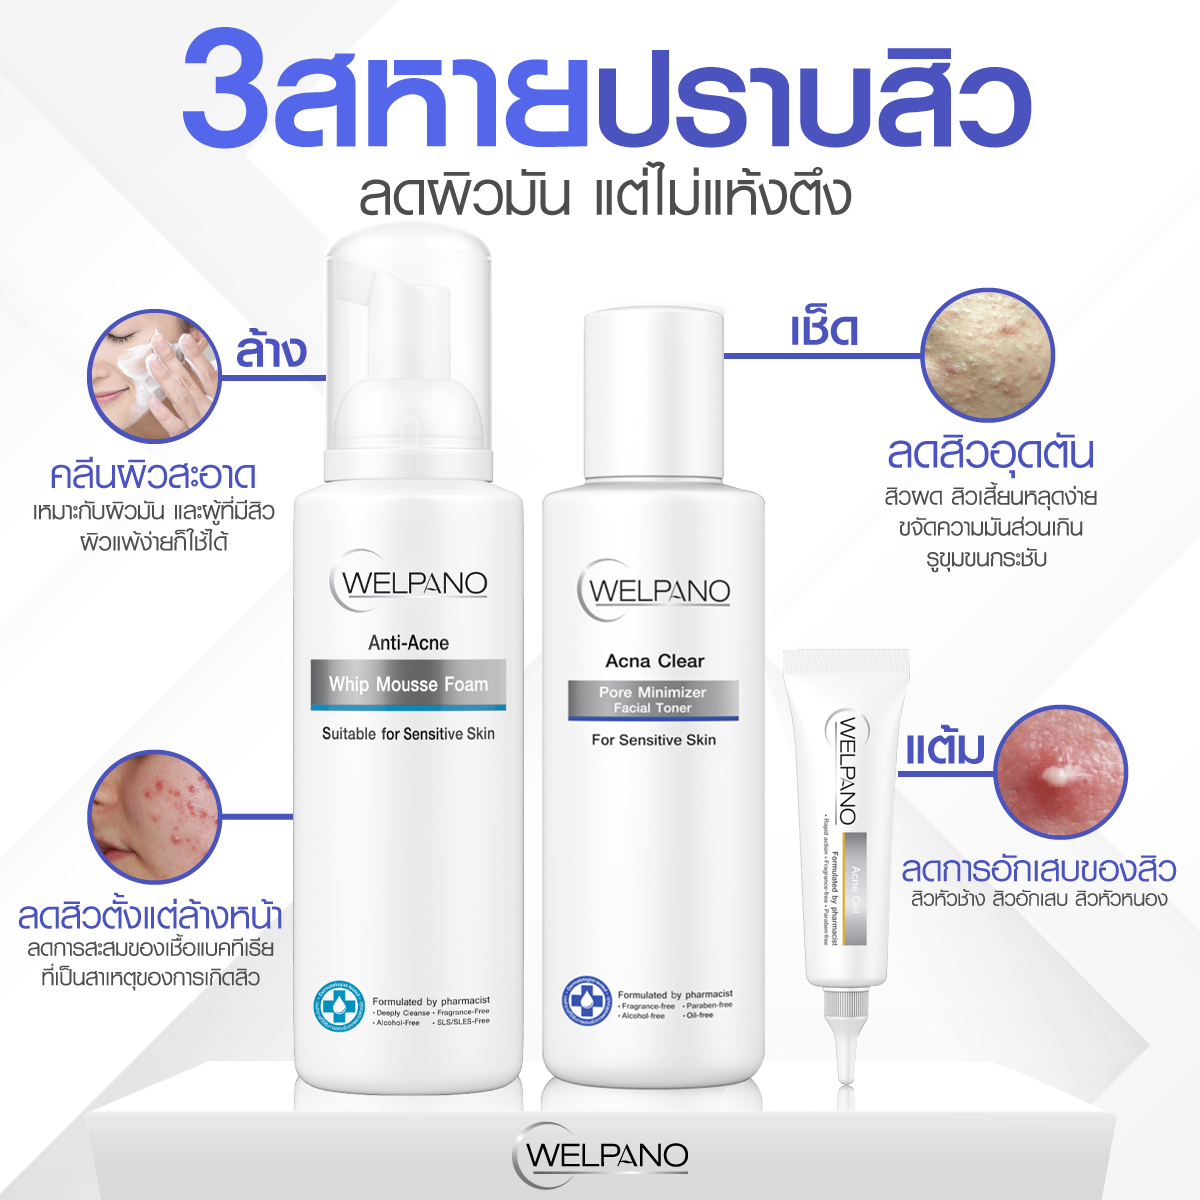 Welpano Anti-Acne Whip Mousse Foam